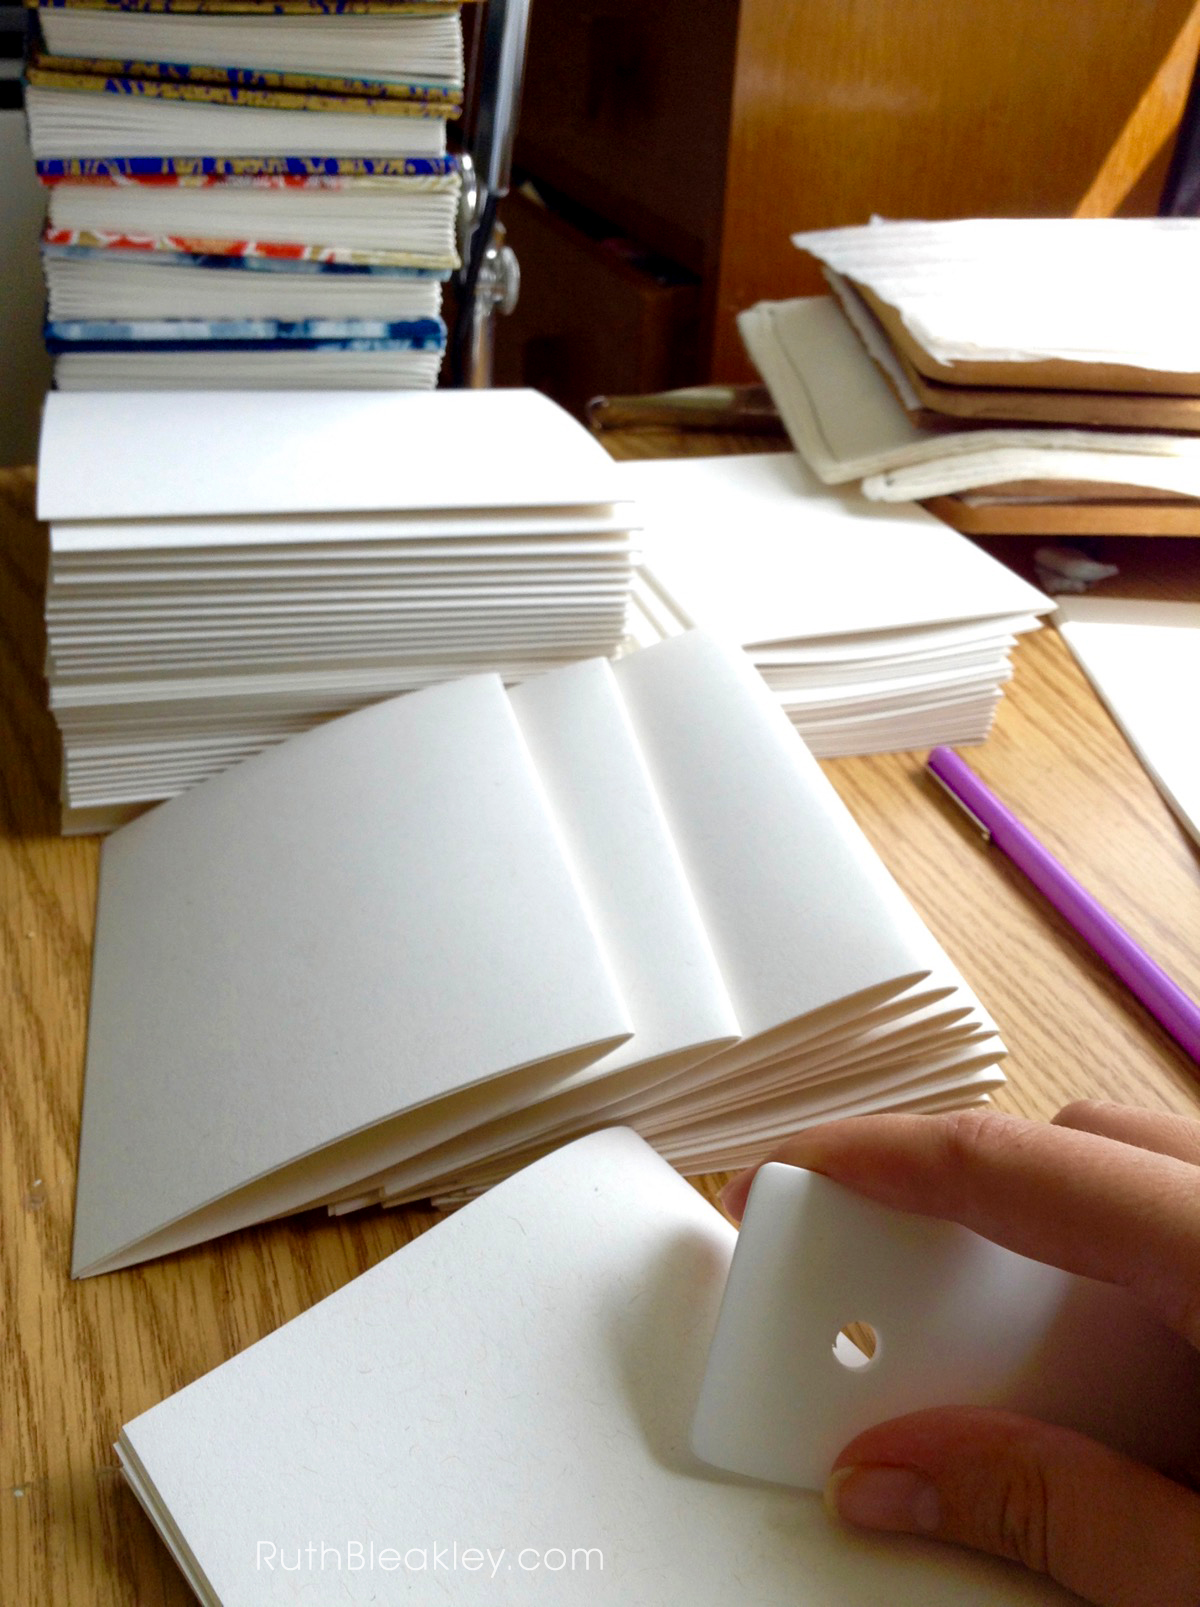 No Bone Folder for Bookbinding? Try These Instead